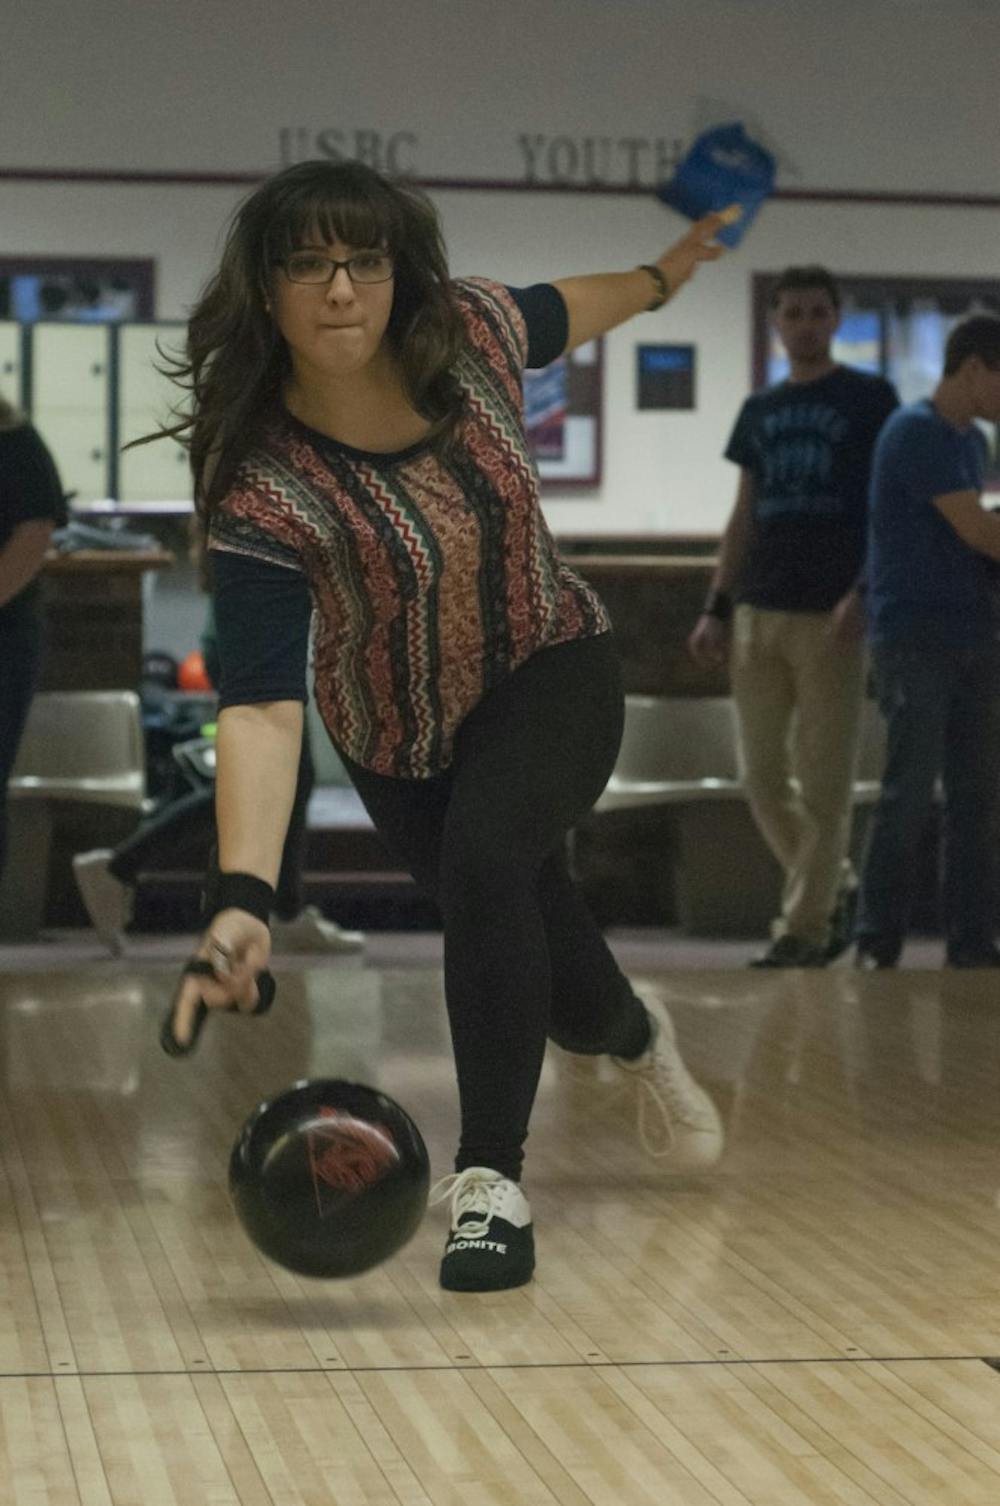 English senior Jennifer Walker throws a ball during an MSU Intercollegiate Bowling team practice on Nov. 9, 2016 at Royal Scot Golf and Bowl of Lansing. Walker said she had been bowling since her junior year of high school.